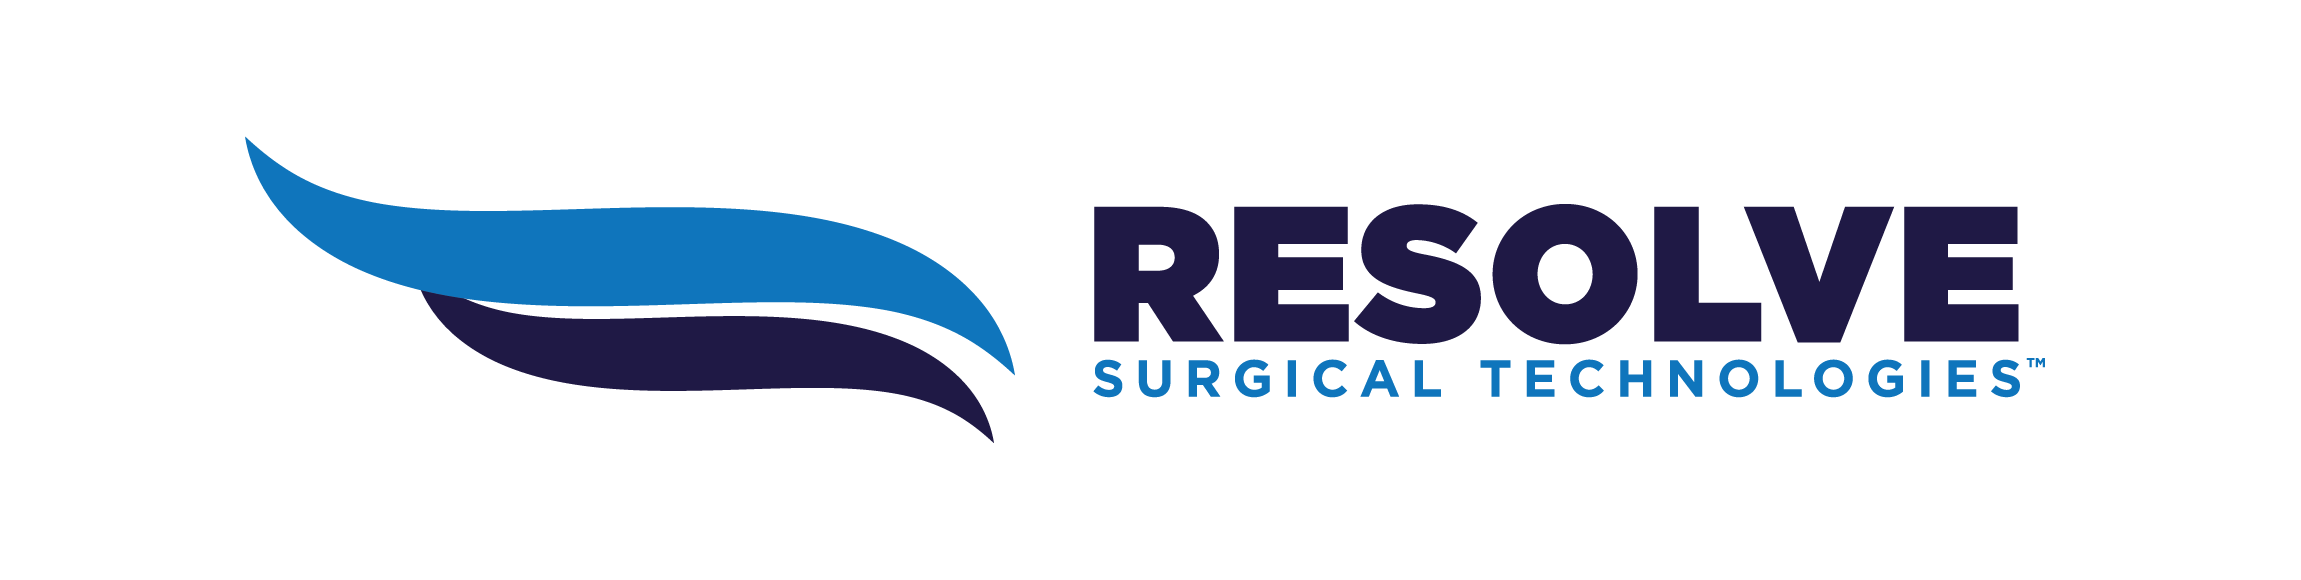 Resolve Surgical Technologies